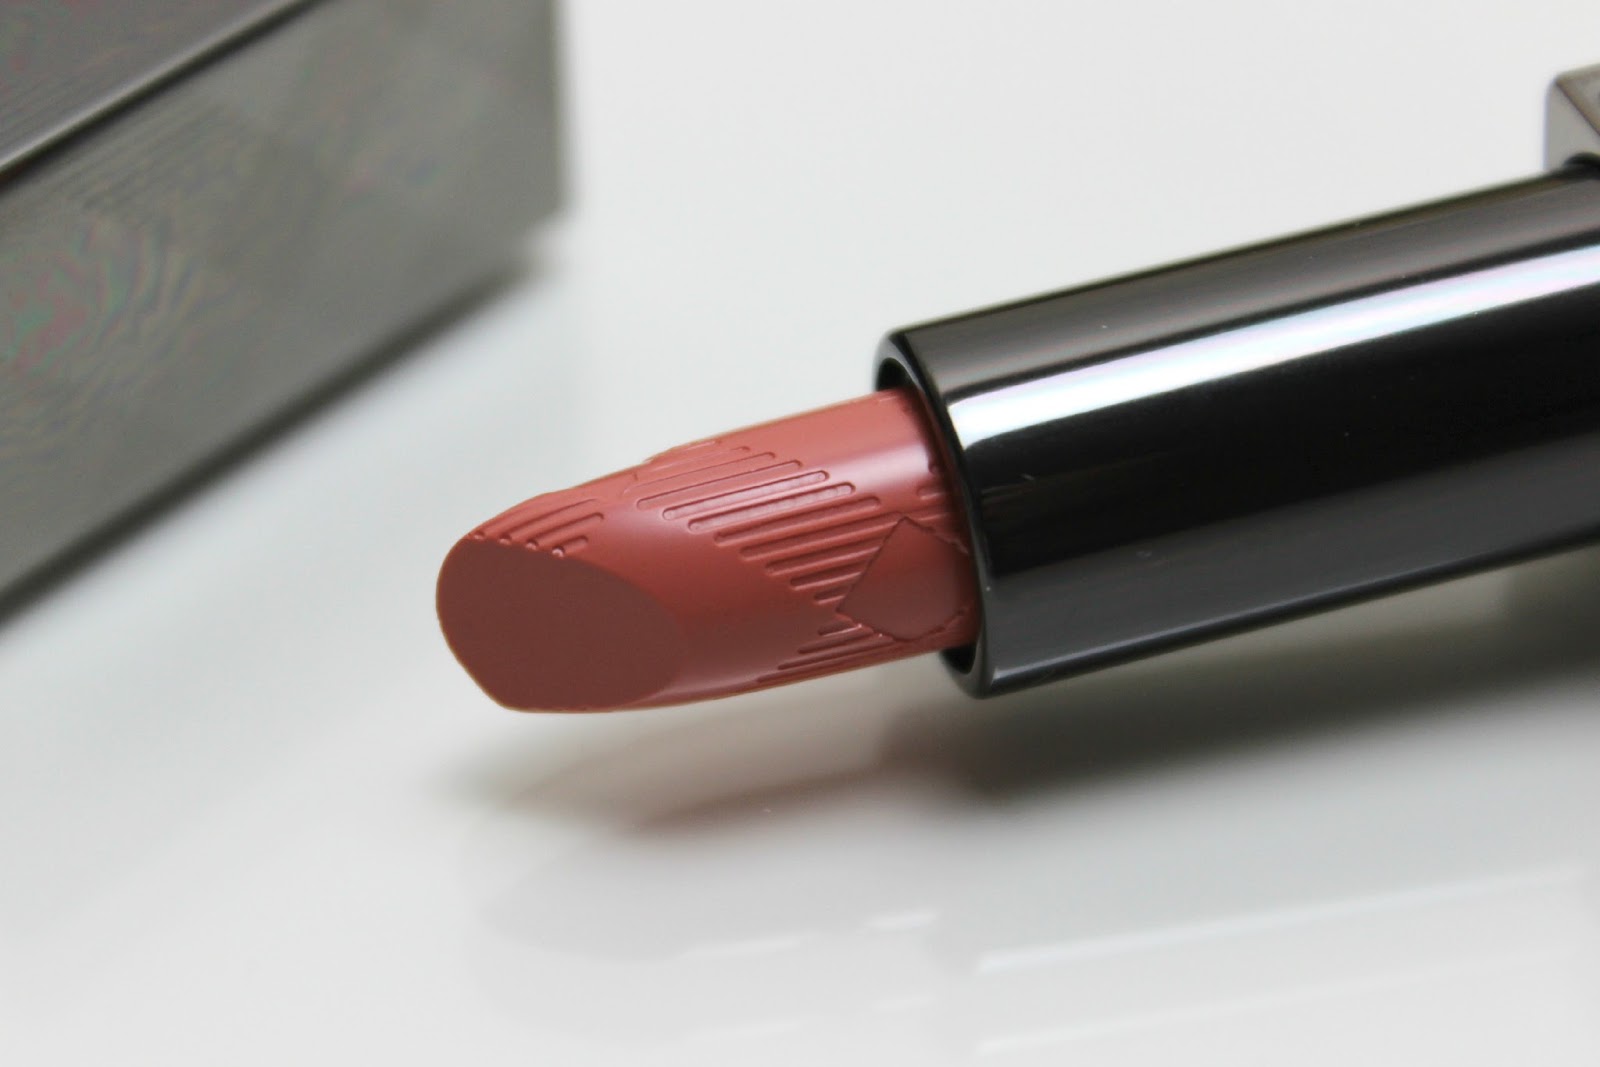 A picture of Burberry Kisses Lipstick in Nude Pink No. 05 